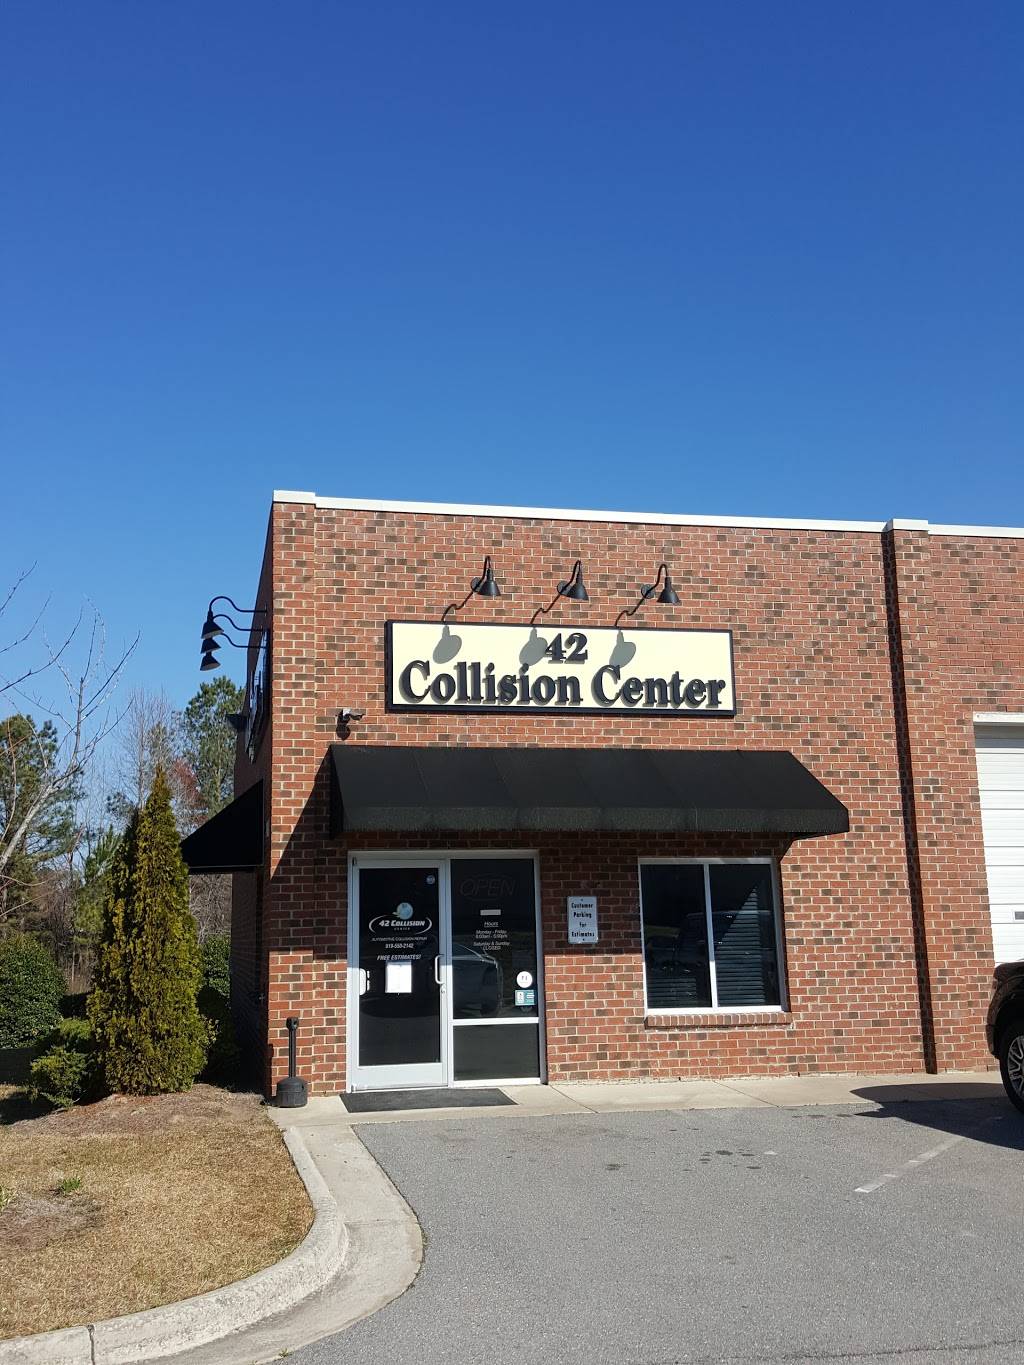 42 Collision Center | 148 State Ave, Clayton, NC 27520 | Phone: (919) 550-2142